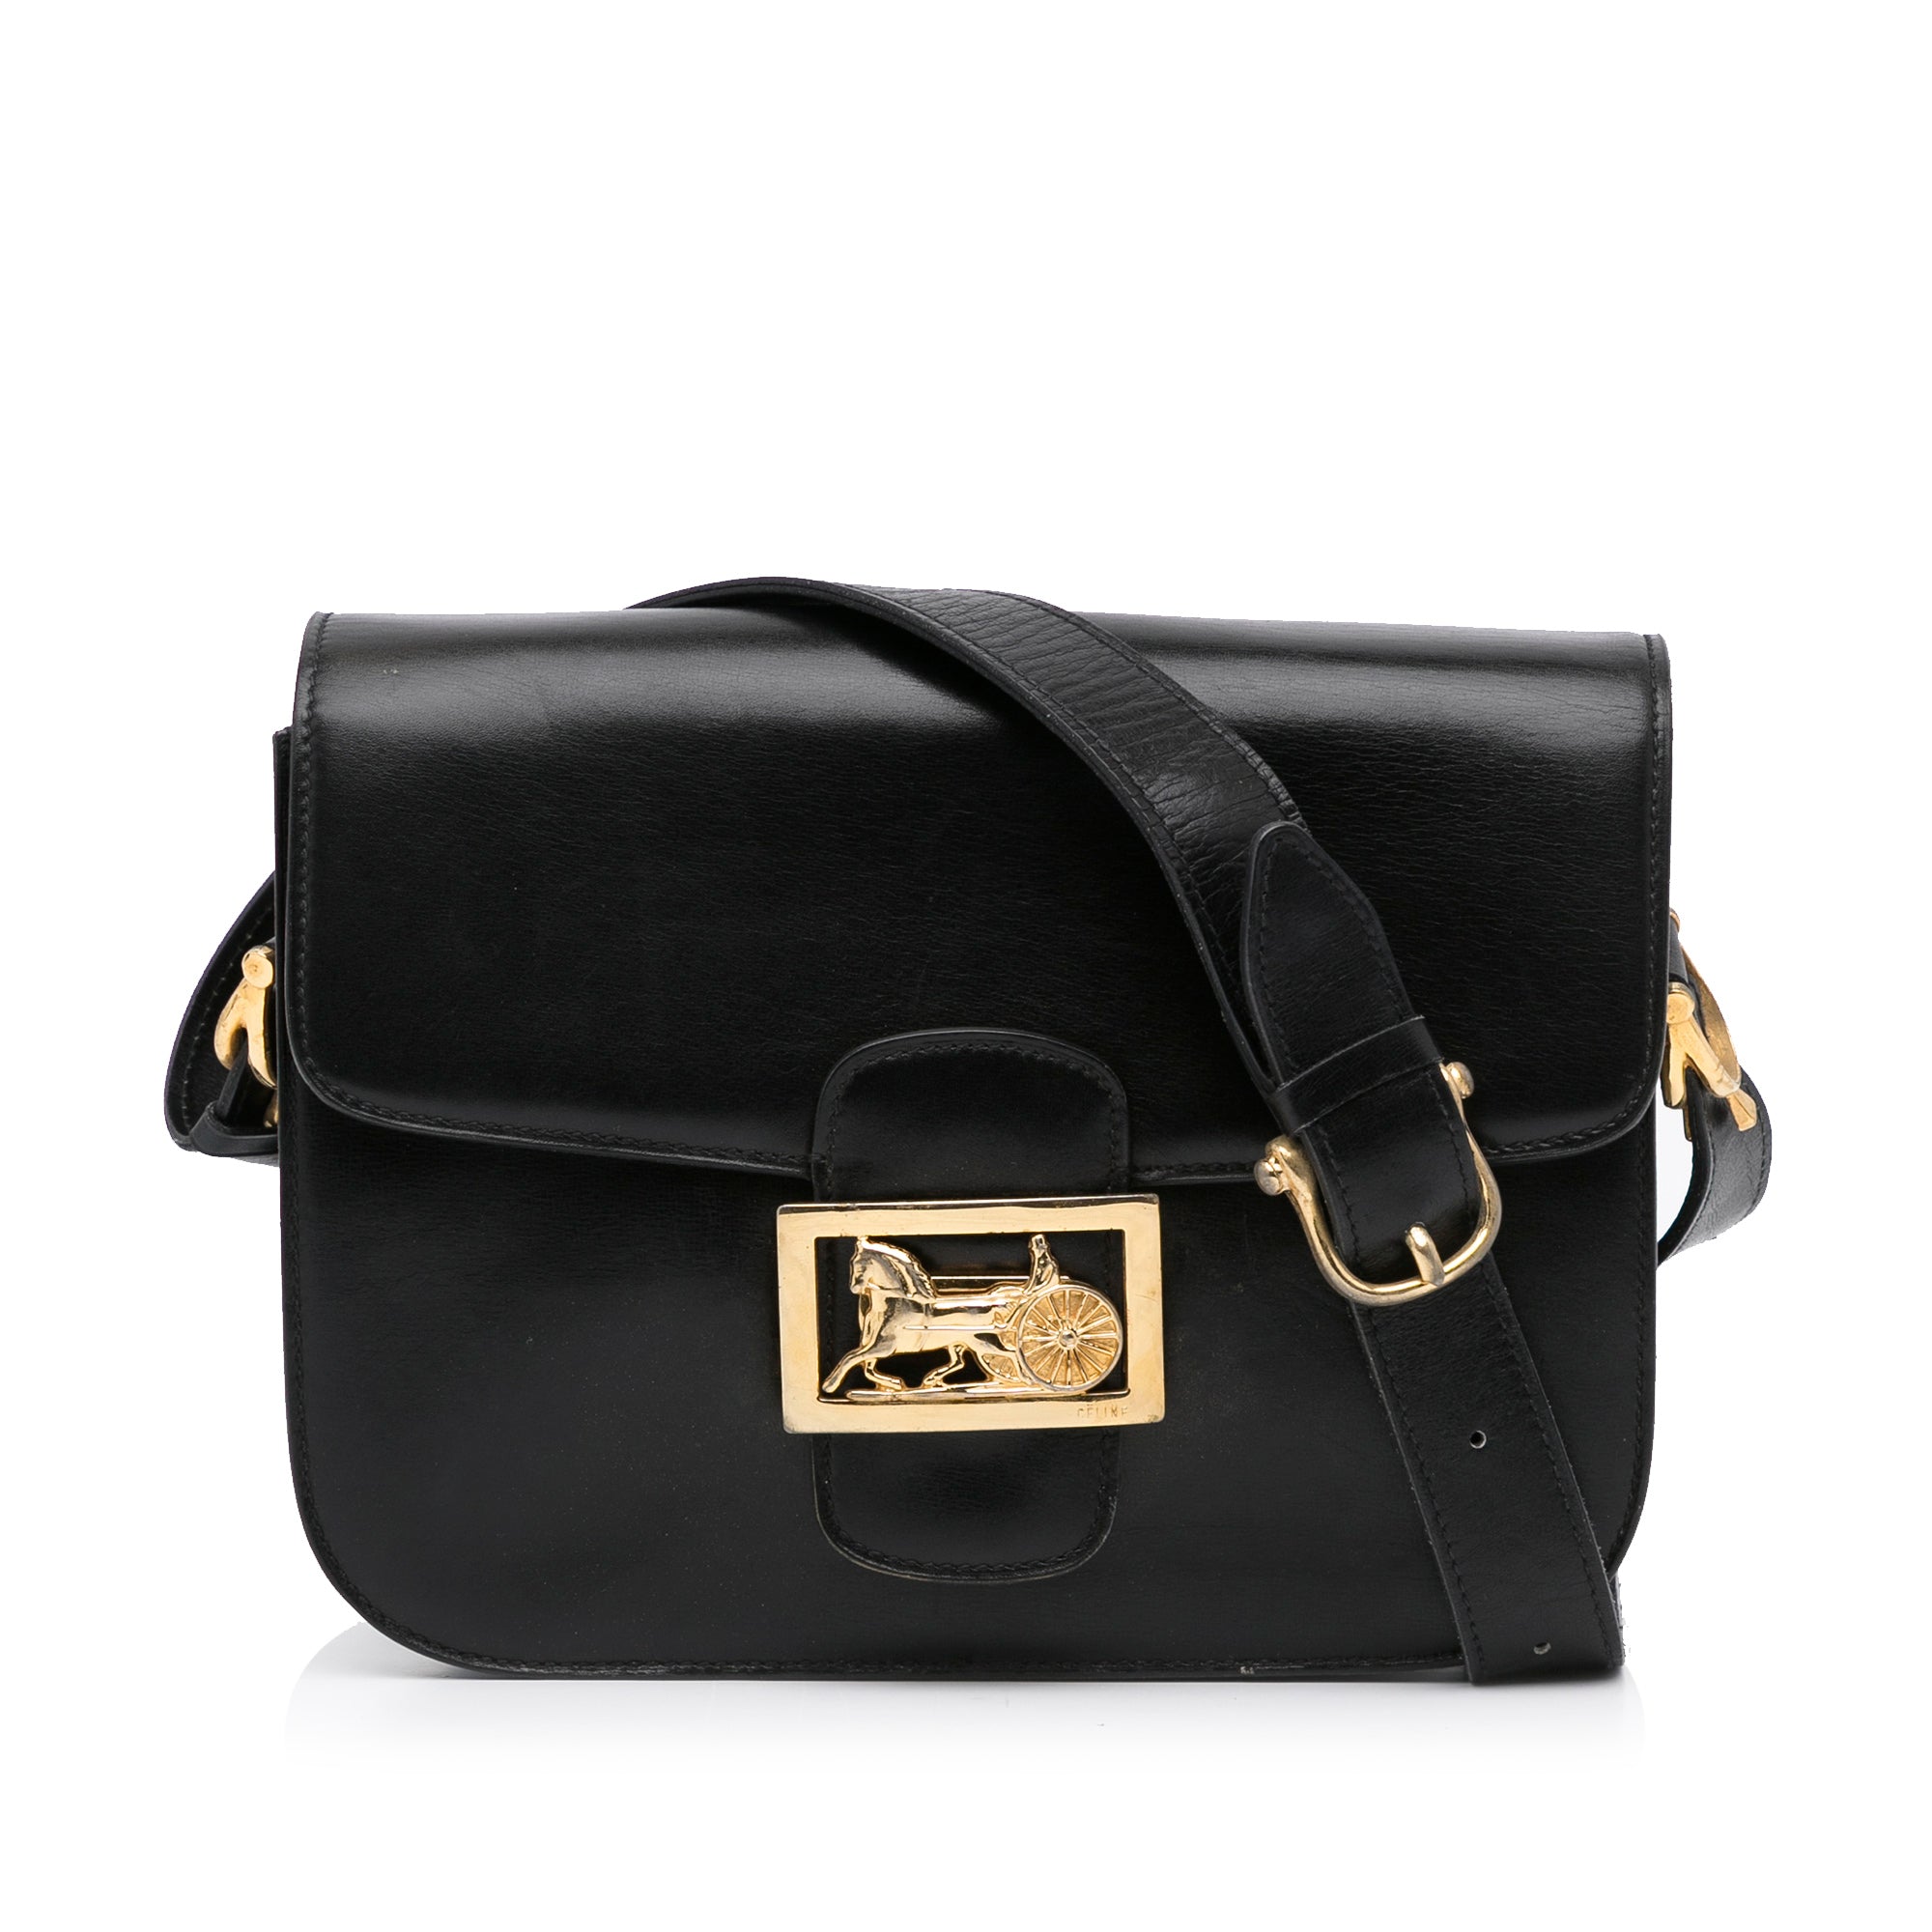 Celine - Authenticated Frame Clutch Bag - Pony-Style Calfskin Black Plain for Women, Never Worn, with Tag